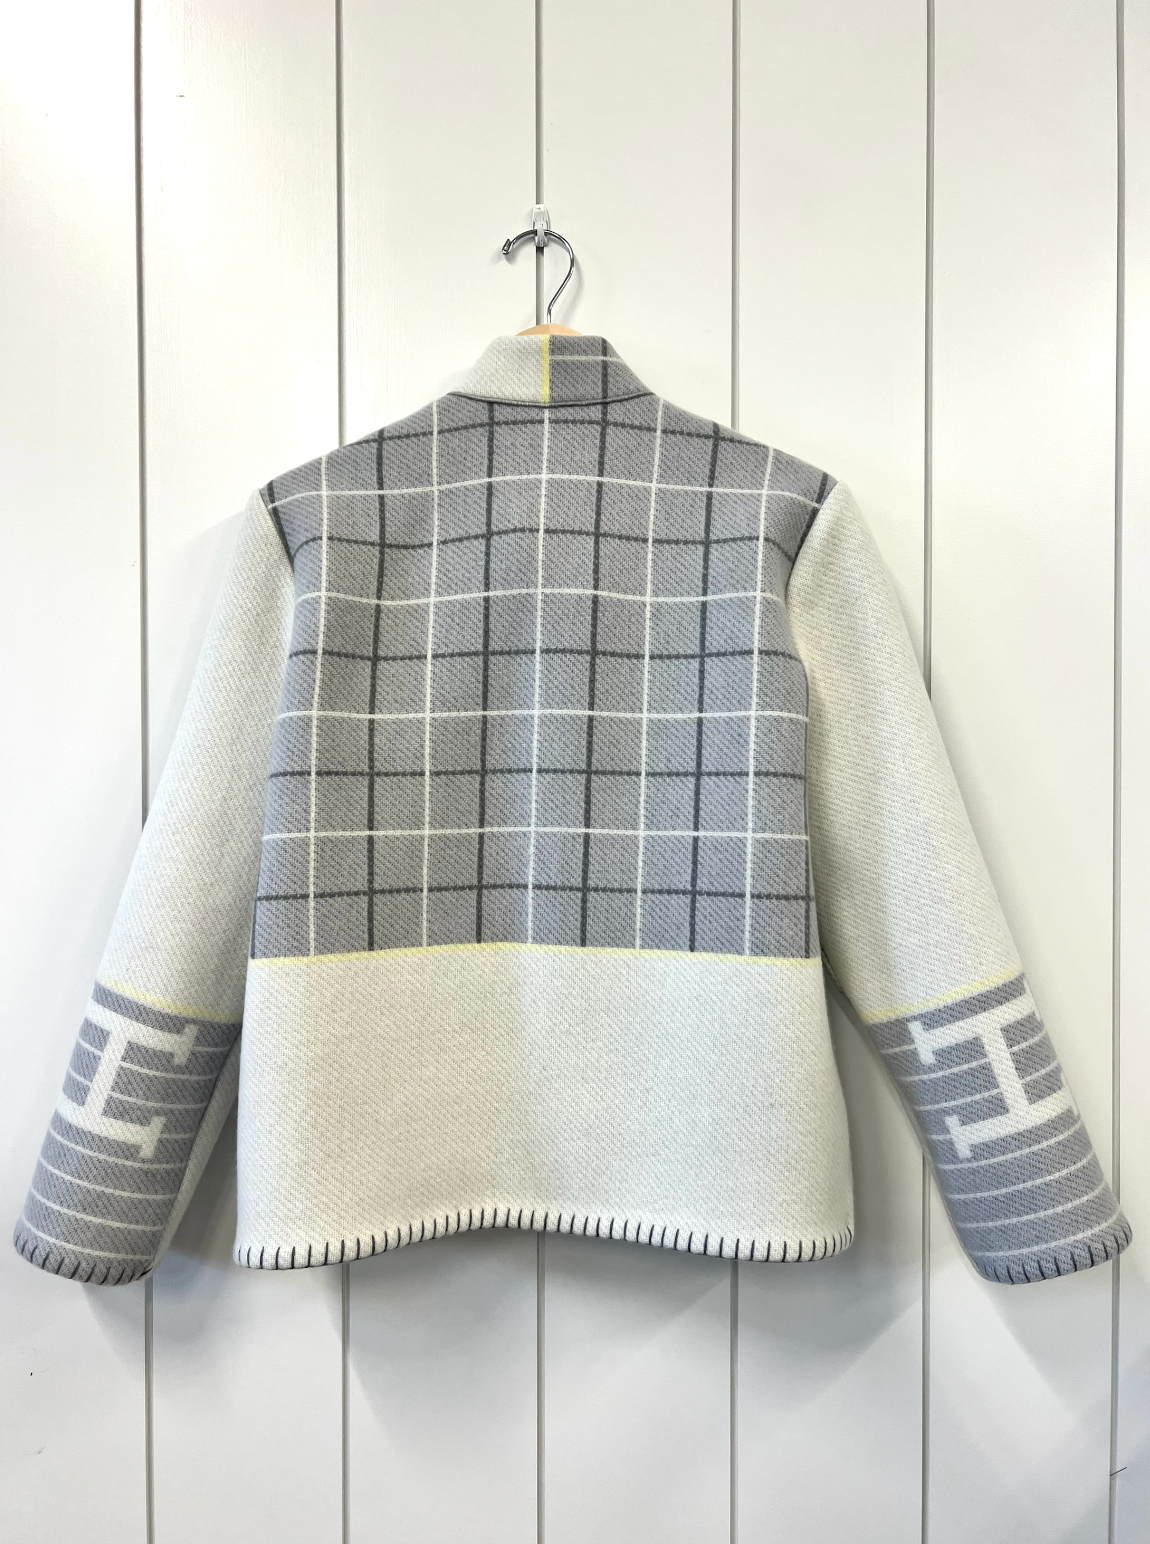 The Grey Checkers Jacket